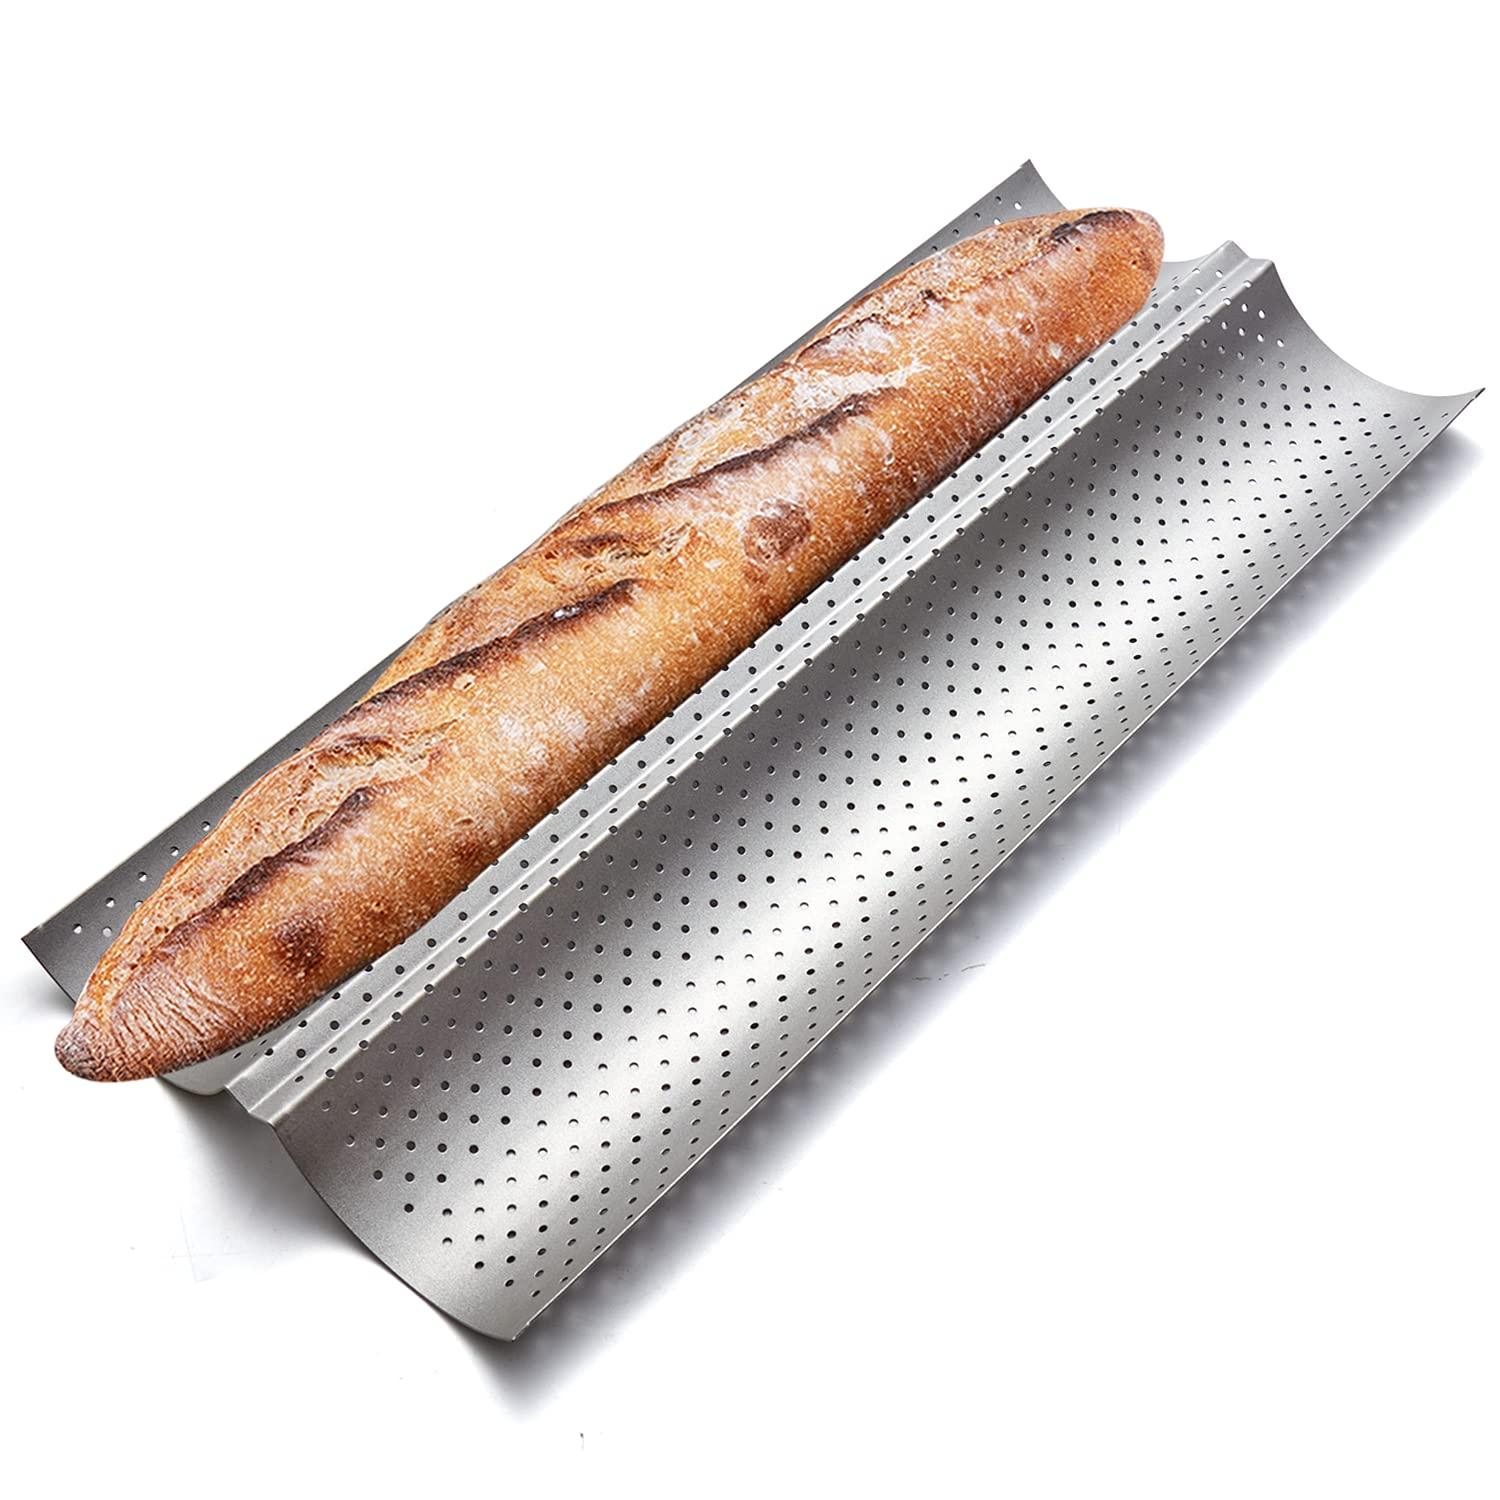 KITESSENSU Nonstick Baguette Pans for French Bread Baking, Perforated 2 Loaves Baguettes Bakery Tray, 15" x 6.3", Silver - CookCave